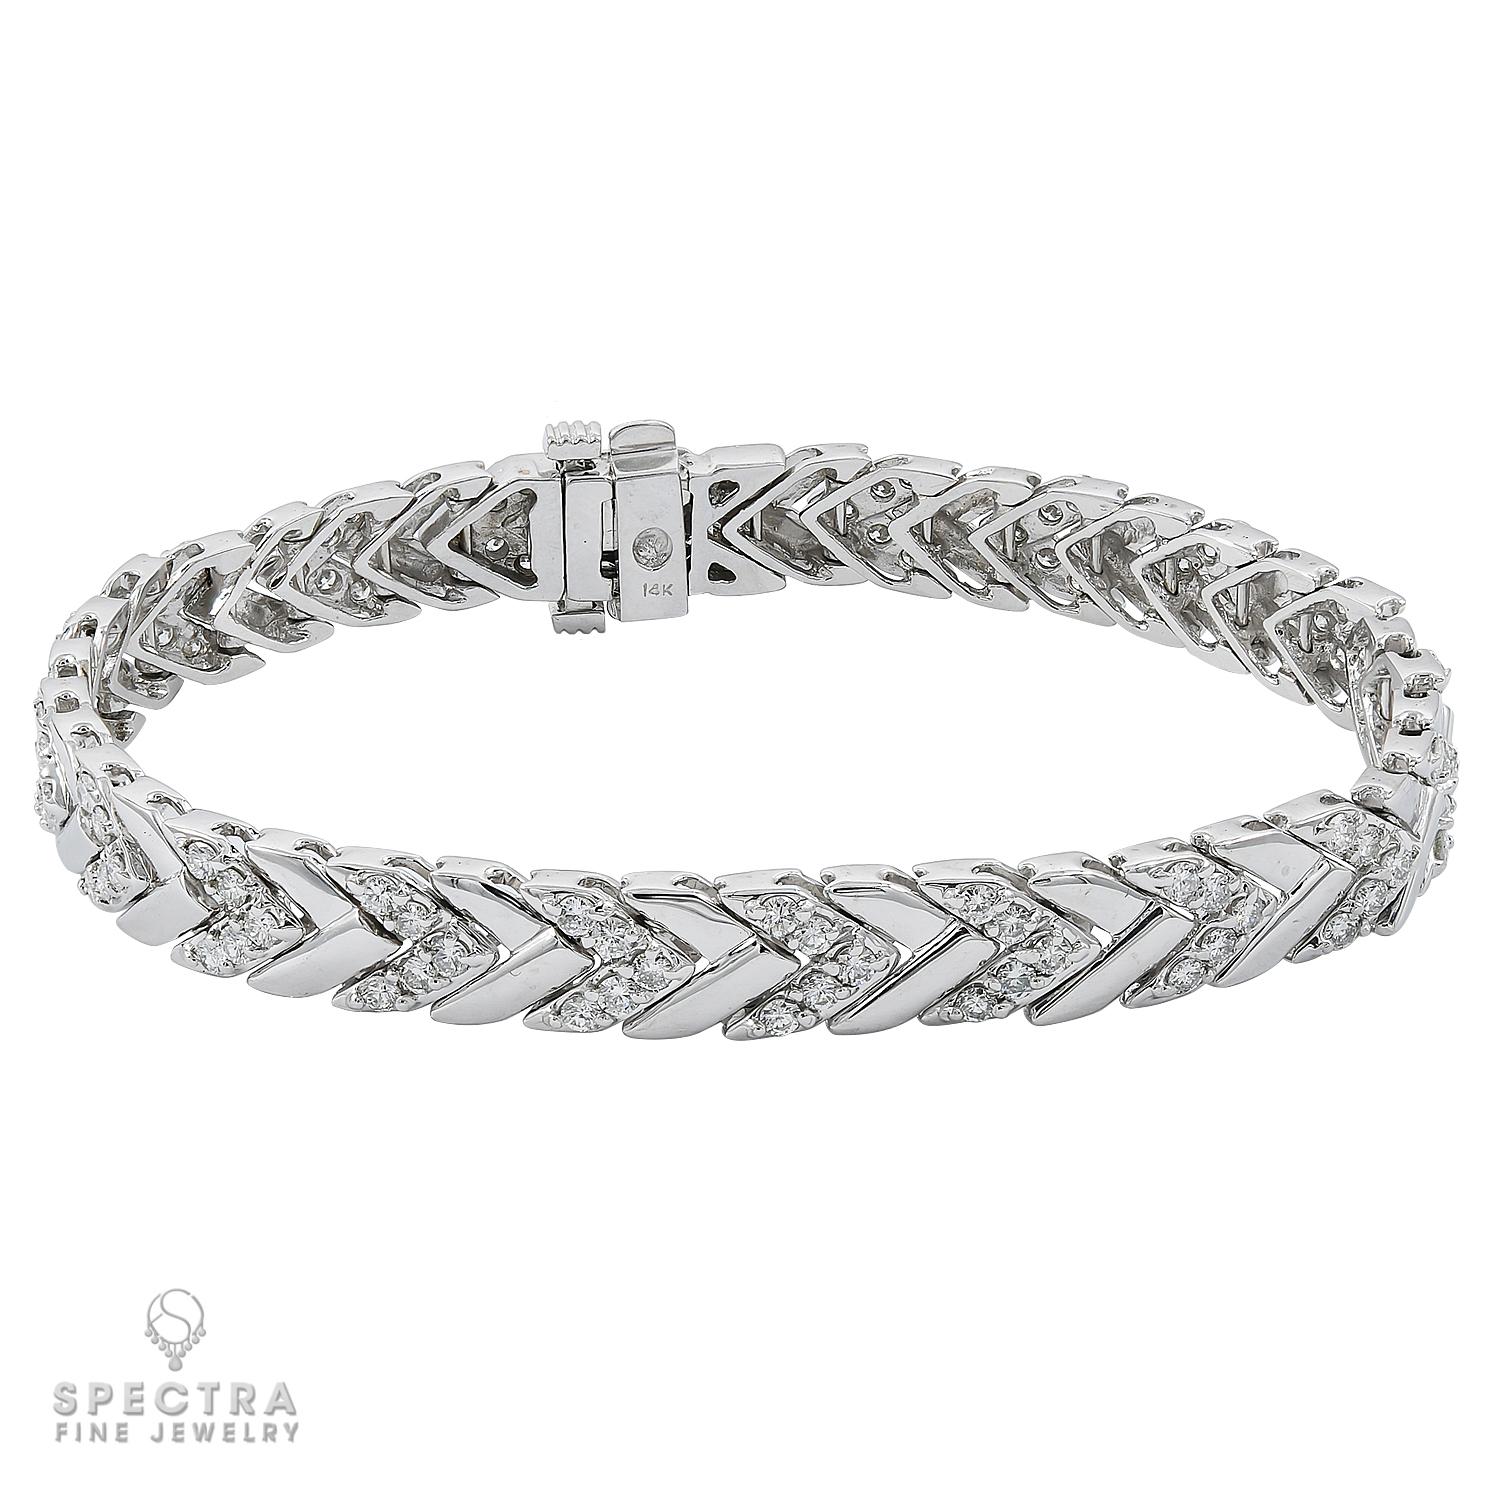 A line bracelet made with diamonds and in 14k white gold.
100 diamonds weighing a total of 5 carats, most with G-H color, VS-SI clarity.
Approximately 0.05 carat each.
7 inches long.
Gross weight 22.15 gram.